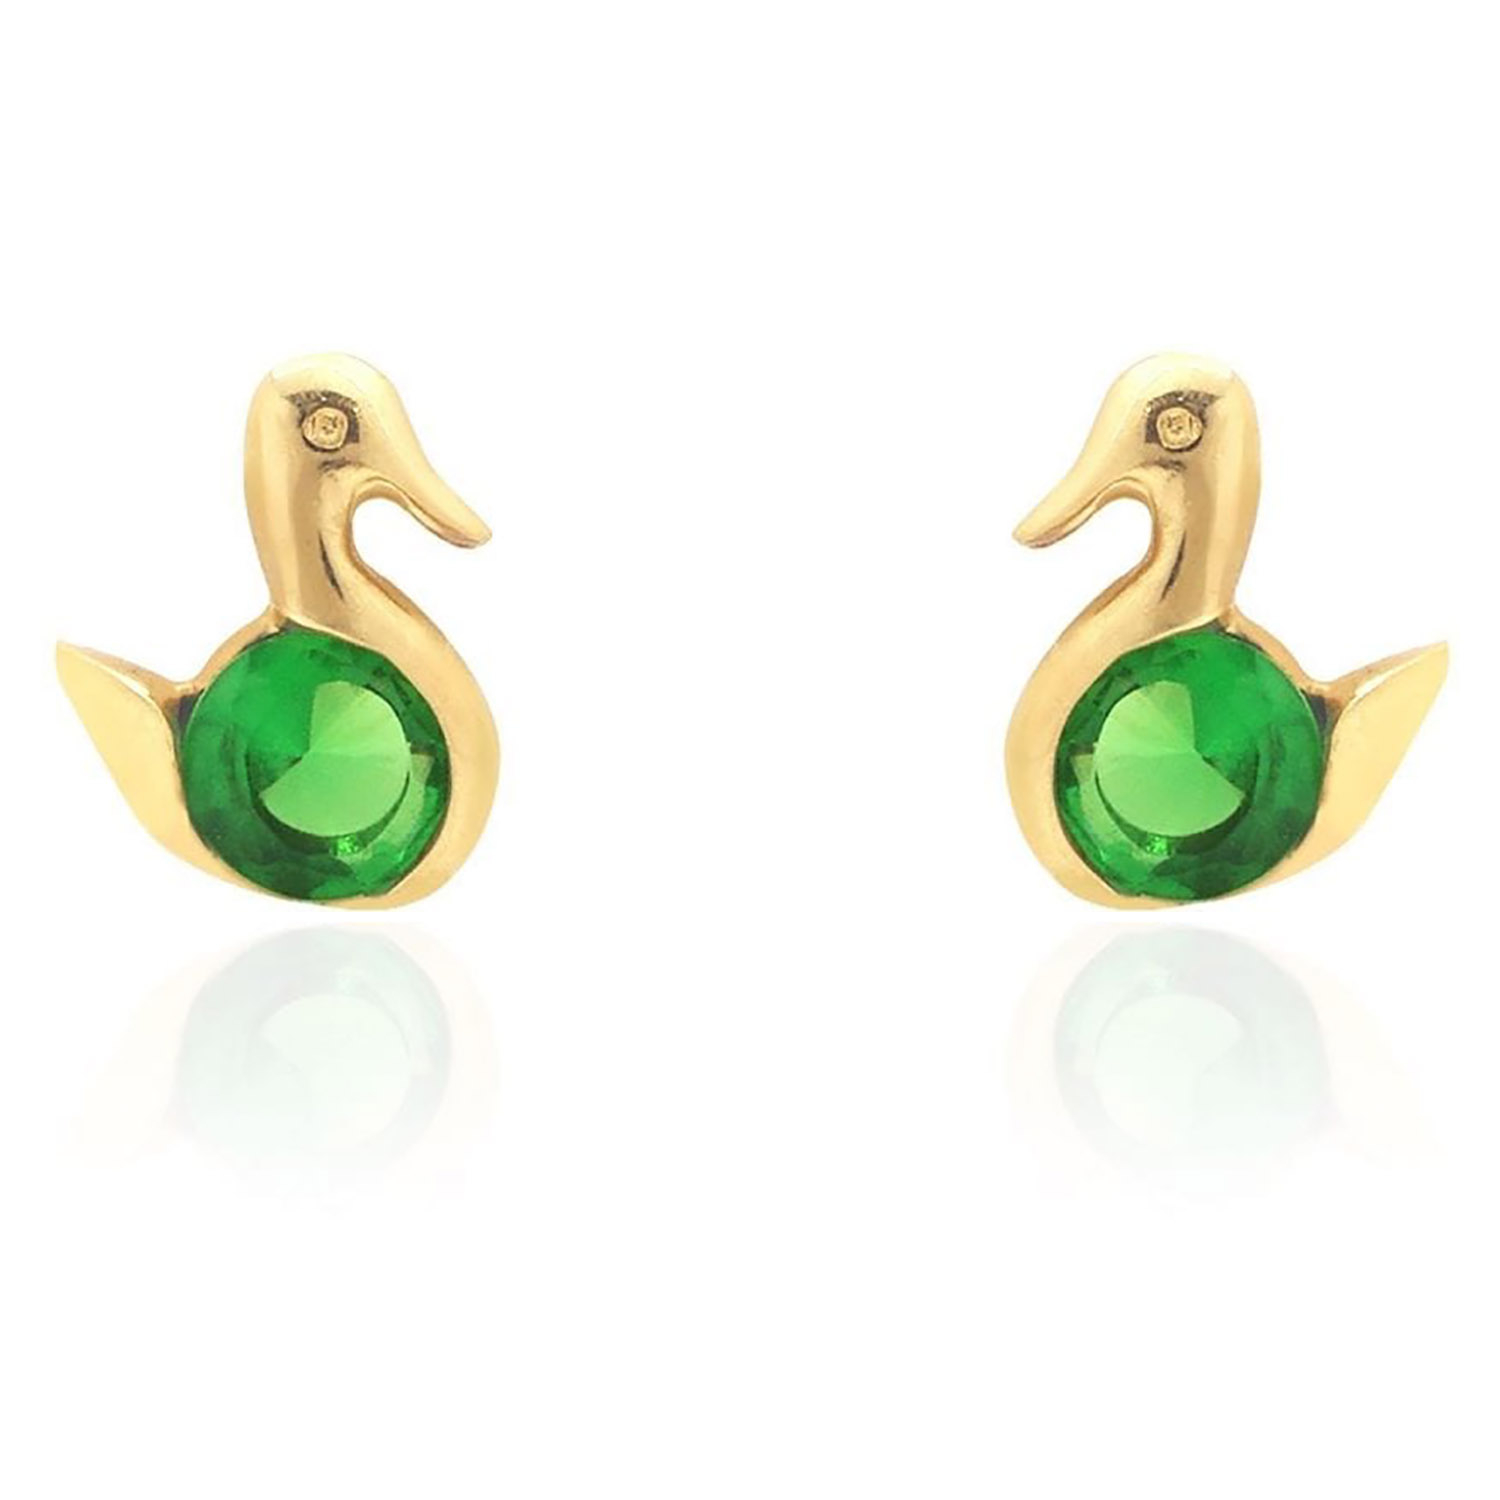 14K Yellow Gold Round Cut Simulated Birthstone Duck Baby Screwback Stud Earrings - May - Emerald